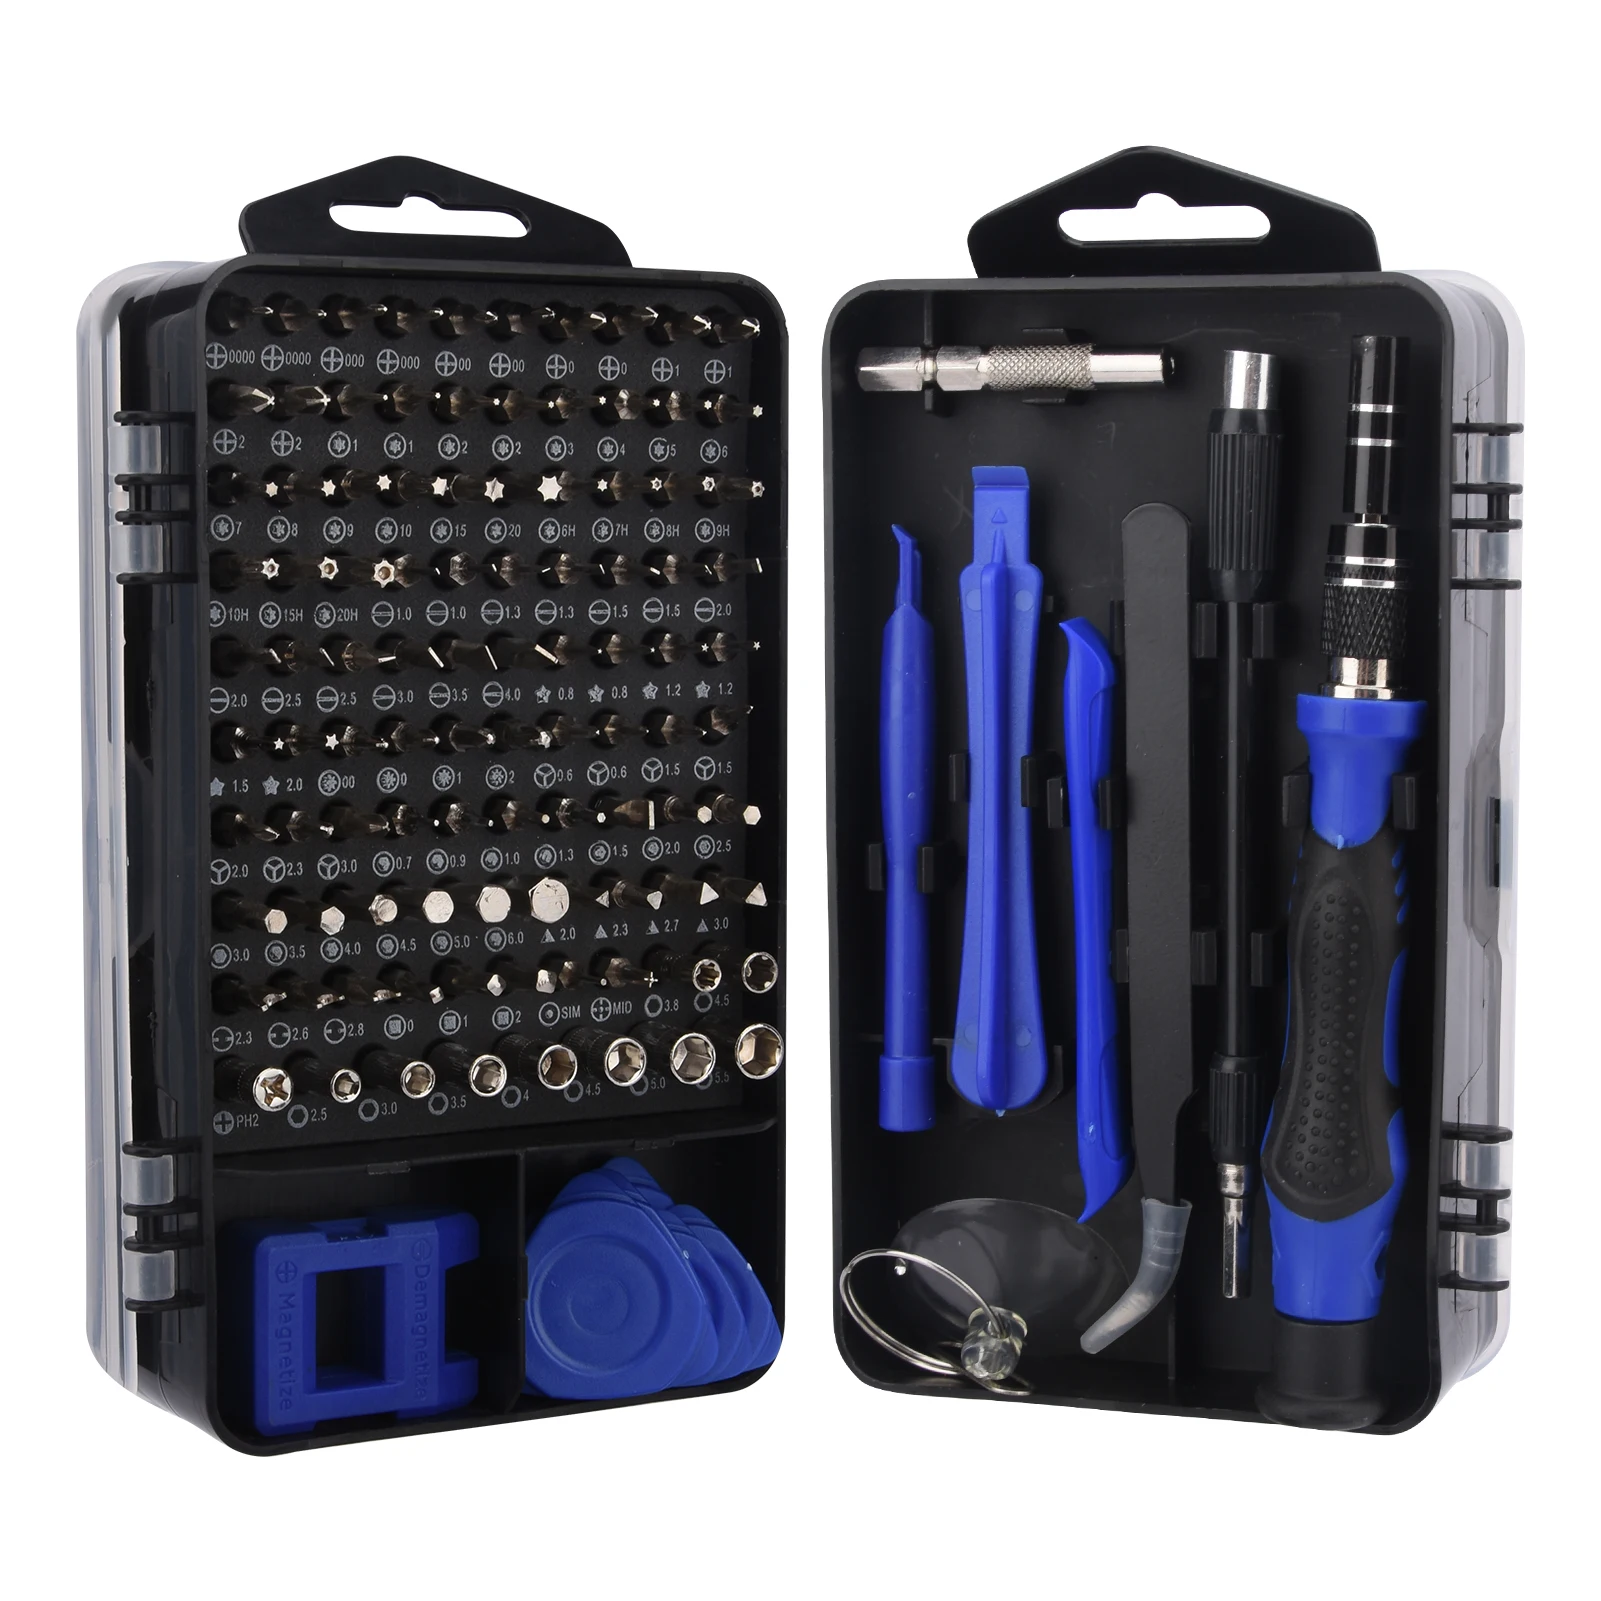 

115 In 1 Precision Watch Screwdriver Set Prying Opening Tool Extension Rod Professional Phone Repair With Case DIY Tablet Laptop